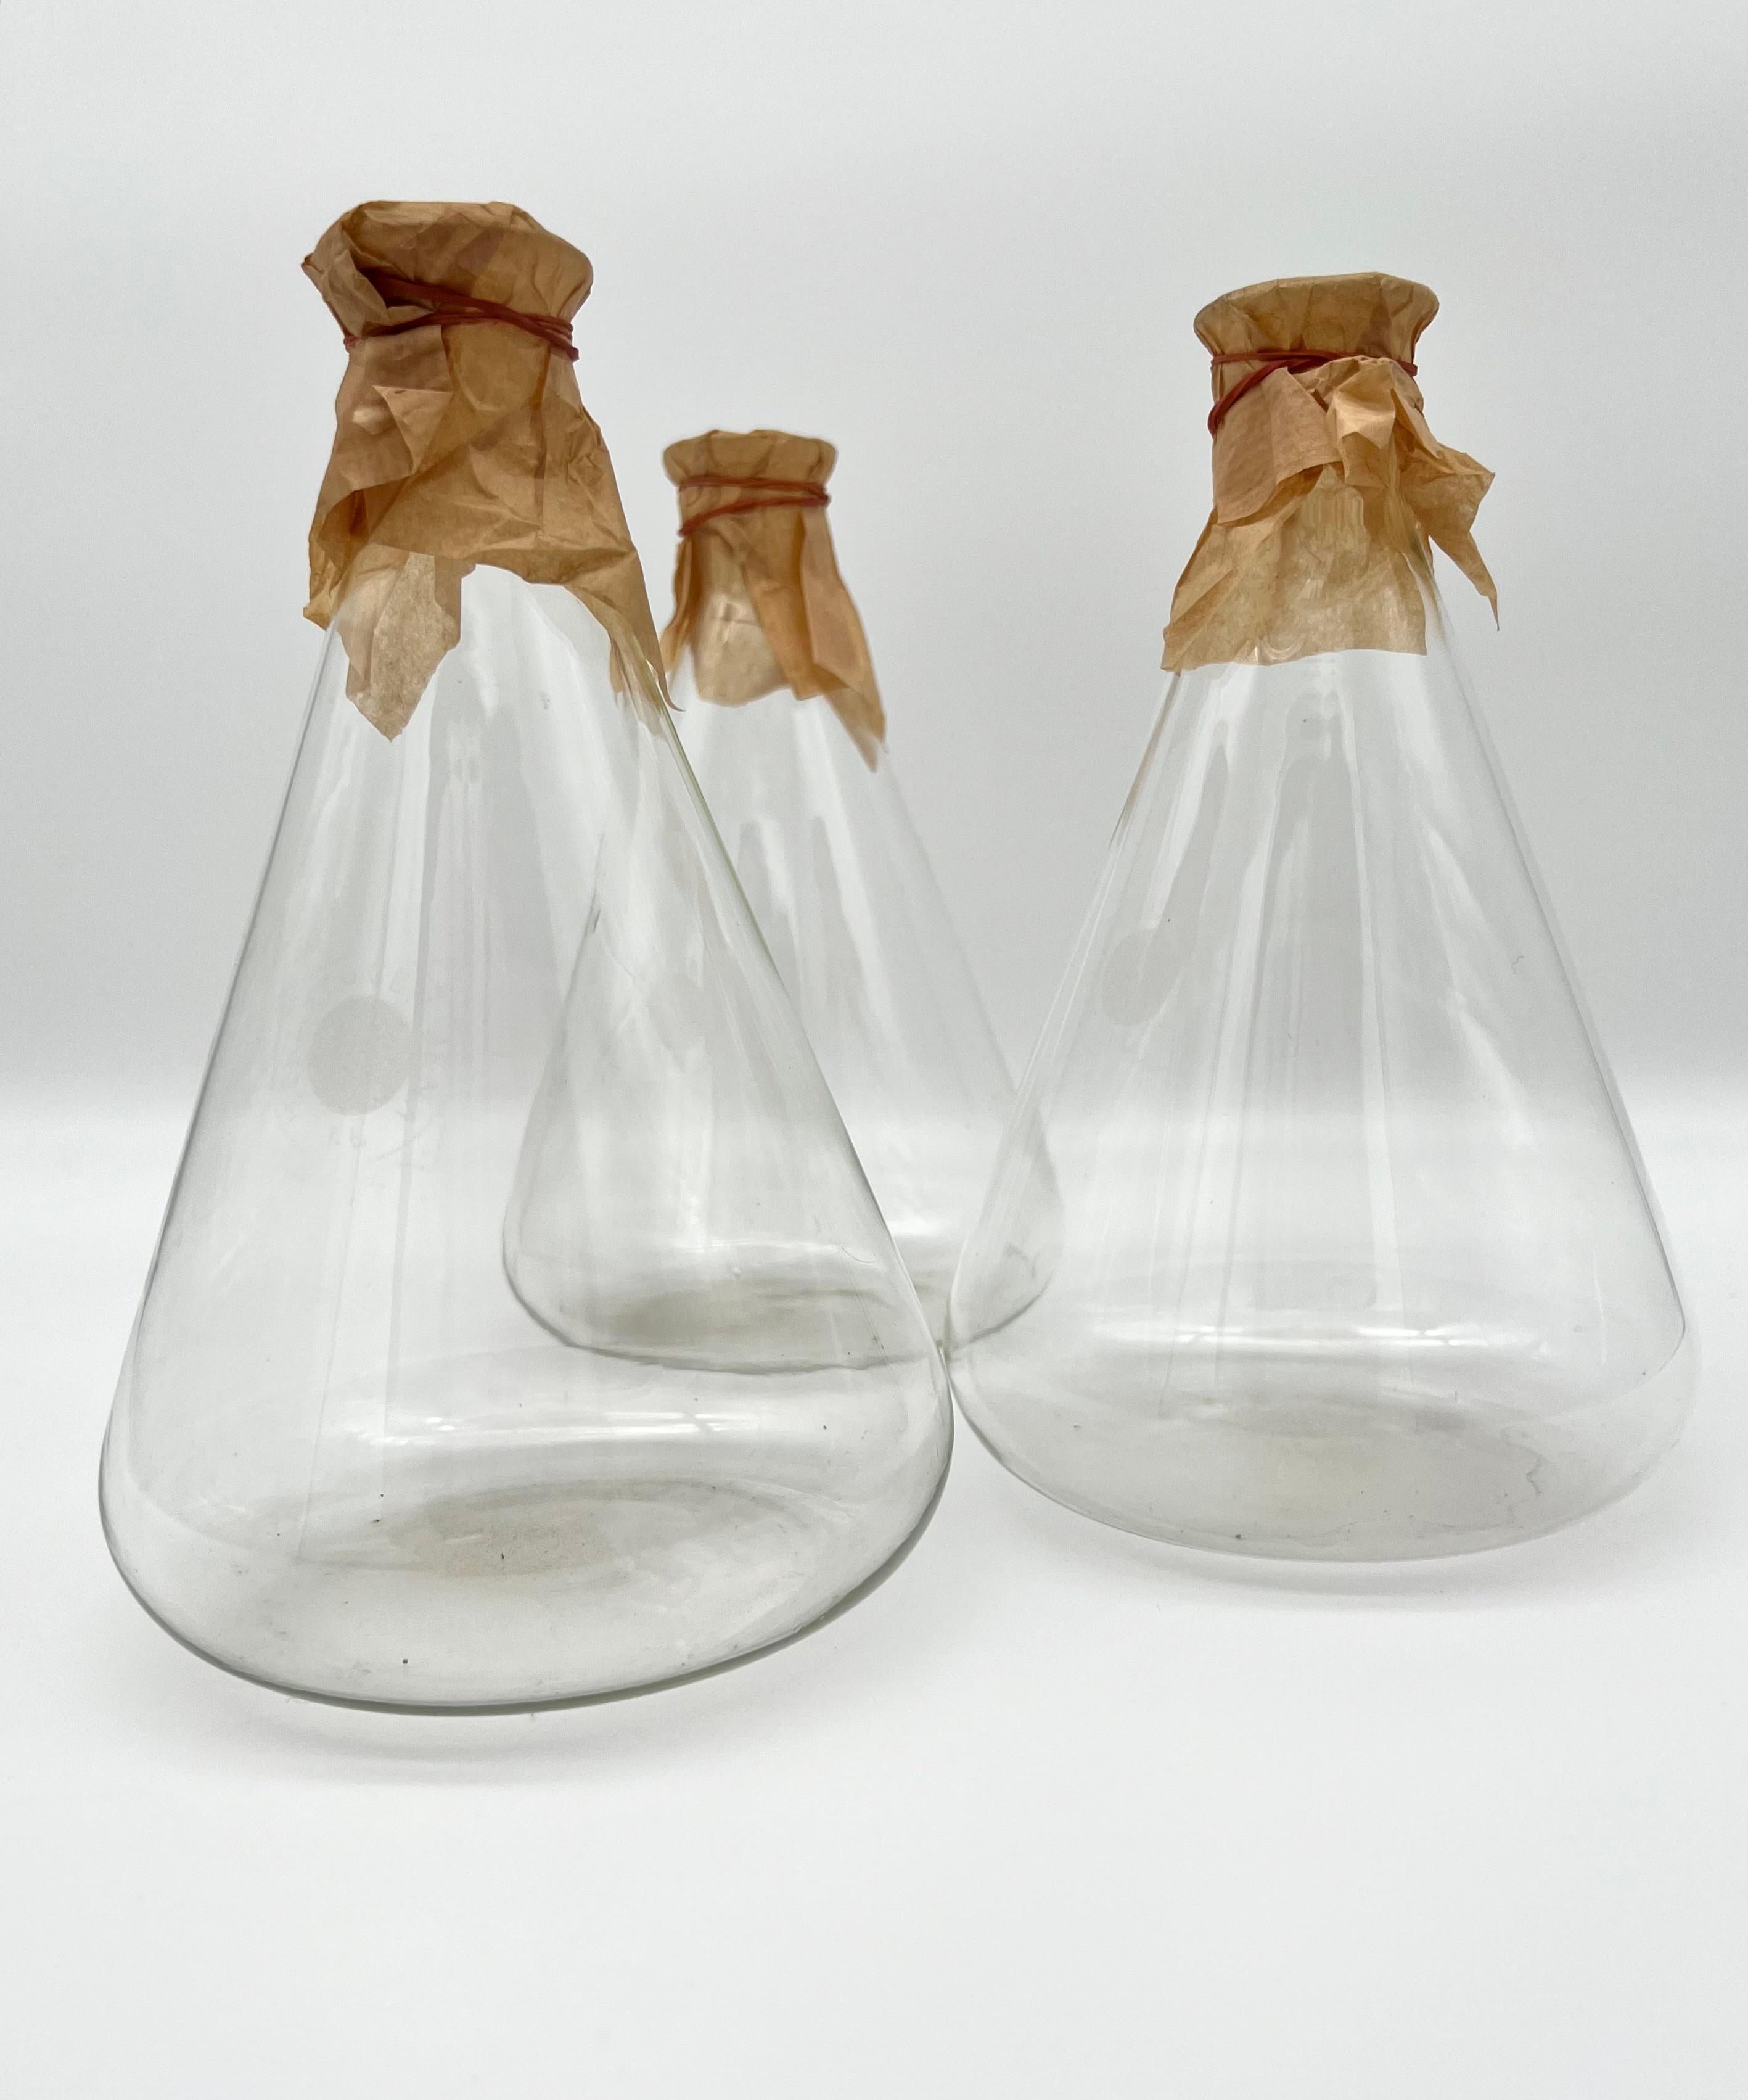 Set of Six Old Pharmacy Glass Bottles, Germany around 1900 For Sale 7